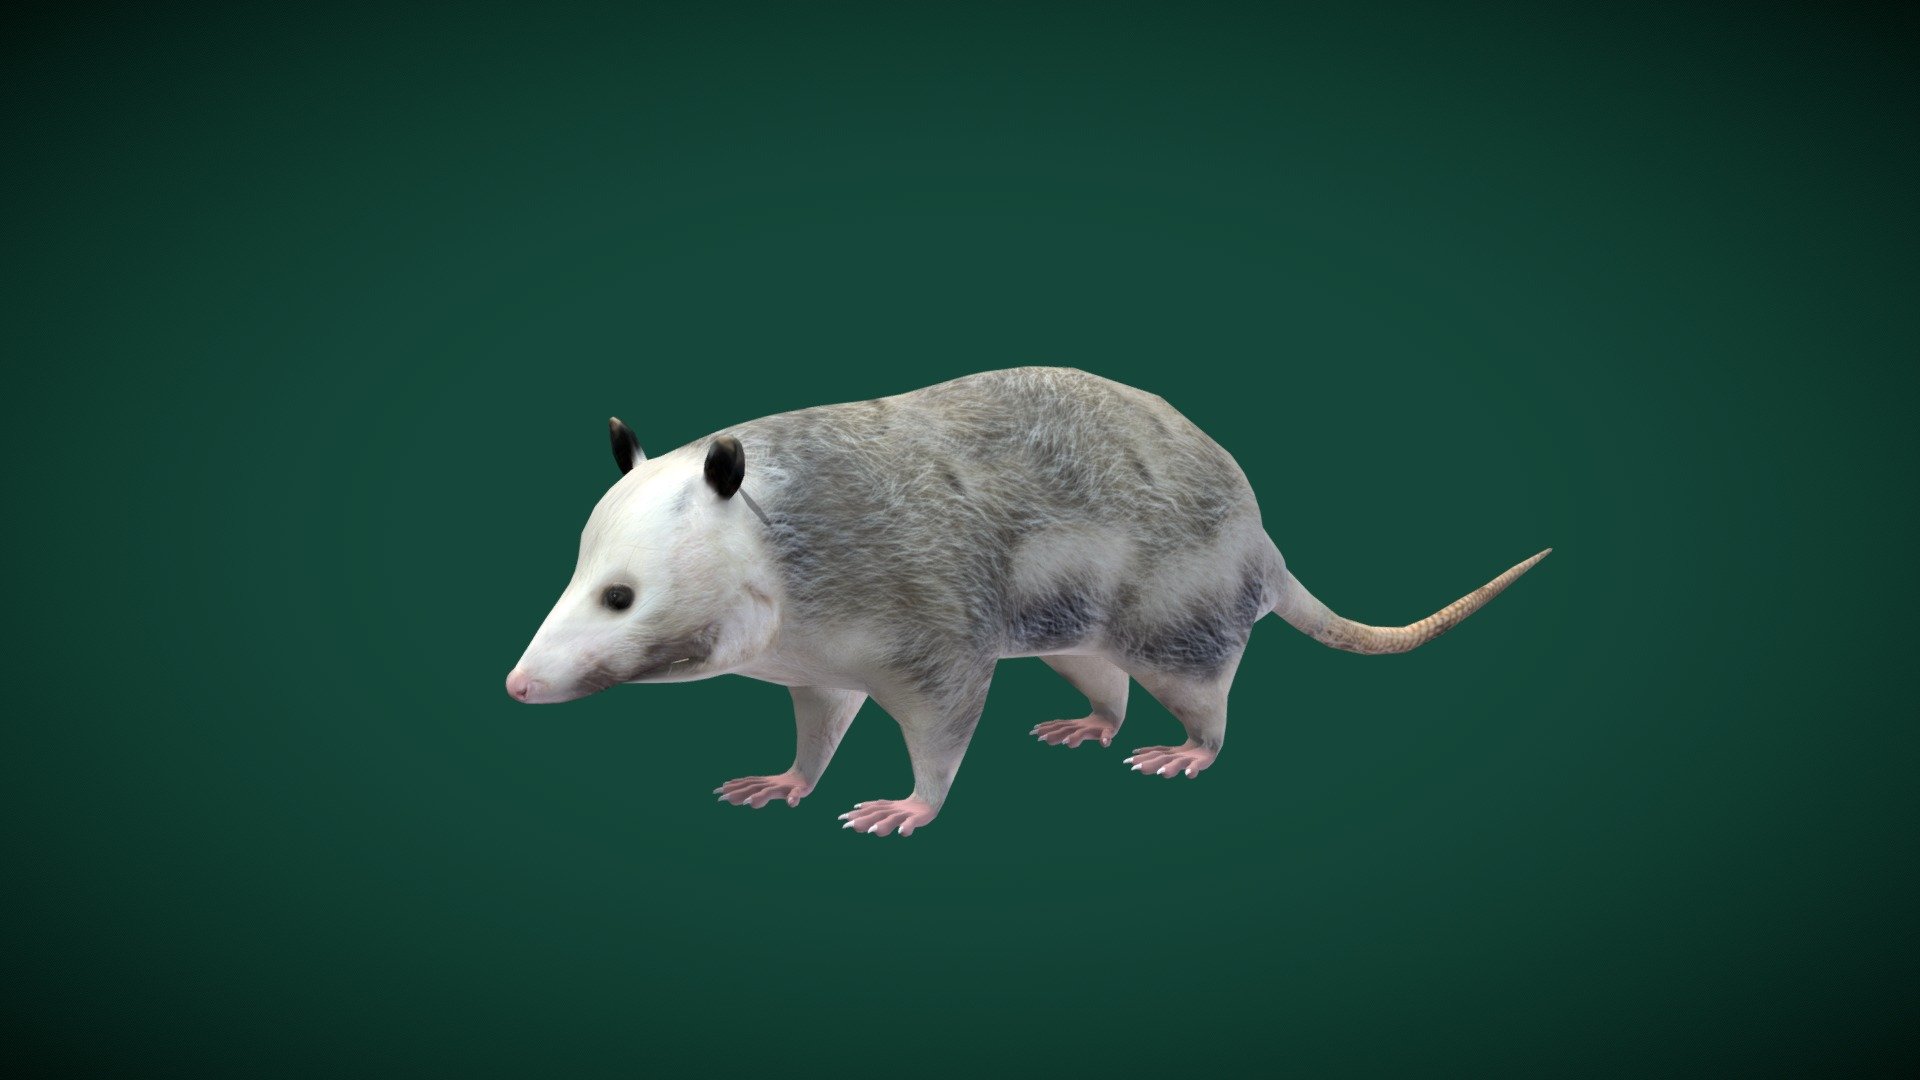 Opossums (marsupial order Didelphimorphia)  

Didelphidae Animal Mammal ( Animalia )

1 Draw Calls

GameReady 

11 Animations

4K PBR Textures Material

Unreal FBX

Unity FBX  

Blend File 

USDZ File (AR Ready). Real Scale Dimension

Textures Files

GLB File


Gltf File ( Spark AR, Lens Studio(SnapChat) , Effector(Tiktok) , Spline, Play Canvas ) Compatible




Triangles : 8251



Vertices  : 4159

Faces     : 4158

Edges     : 8312

Diffuse , Metallic, Roughness , Normal Map ,Specular Map,AO
Opossums are members of the marsupial order Didelphimorphia endemic to the Americas. The largest order of marsupials in the Western Hemisphere, it comprises 93 species in 18 genera. Wikipedia
Lifespan: Virginia opossum: 4 years, Common_opossum: 2 years
Scientific name: Didelphidae
Domain: Eukaryota
Family: Didelphidae; Gray, 1821
Infraclass: Marsupialia
Kingdom: Animalia - Opossum  Didelphidae (Lowpoly) - 3D model by Nyilonelycompany 3d model